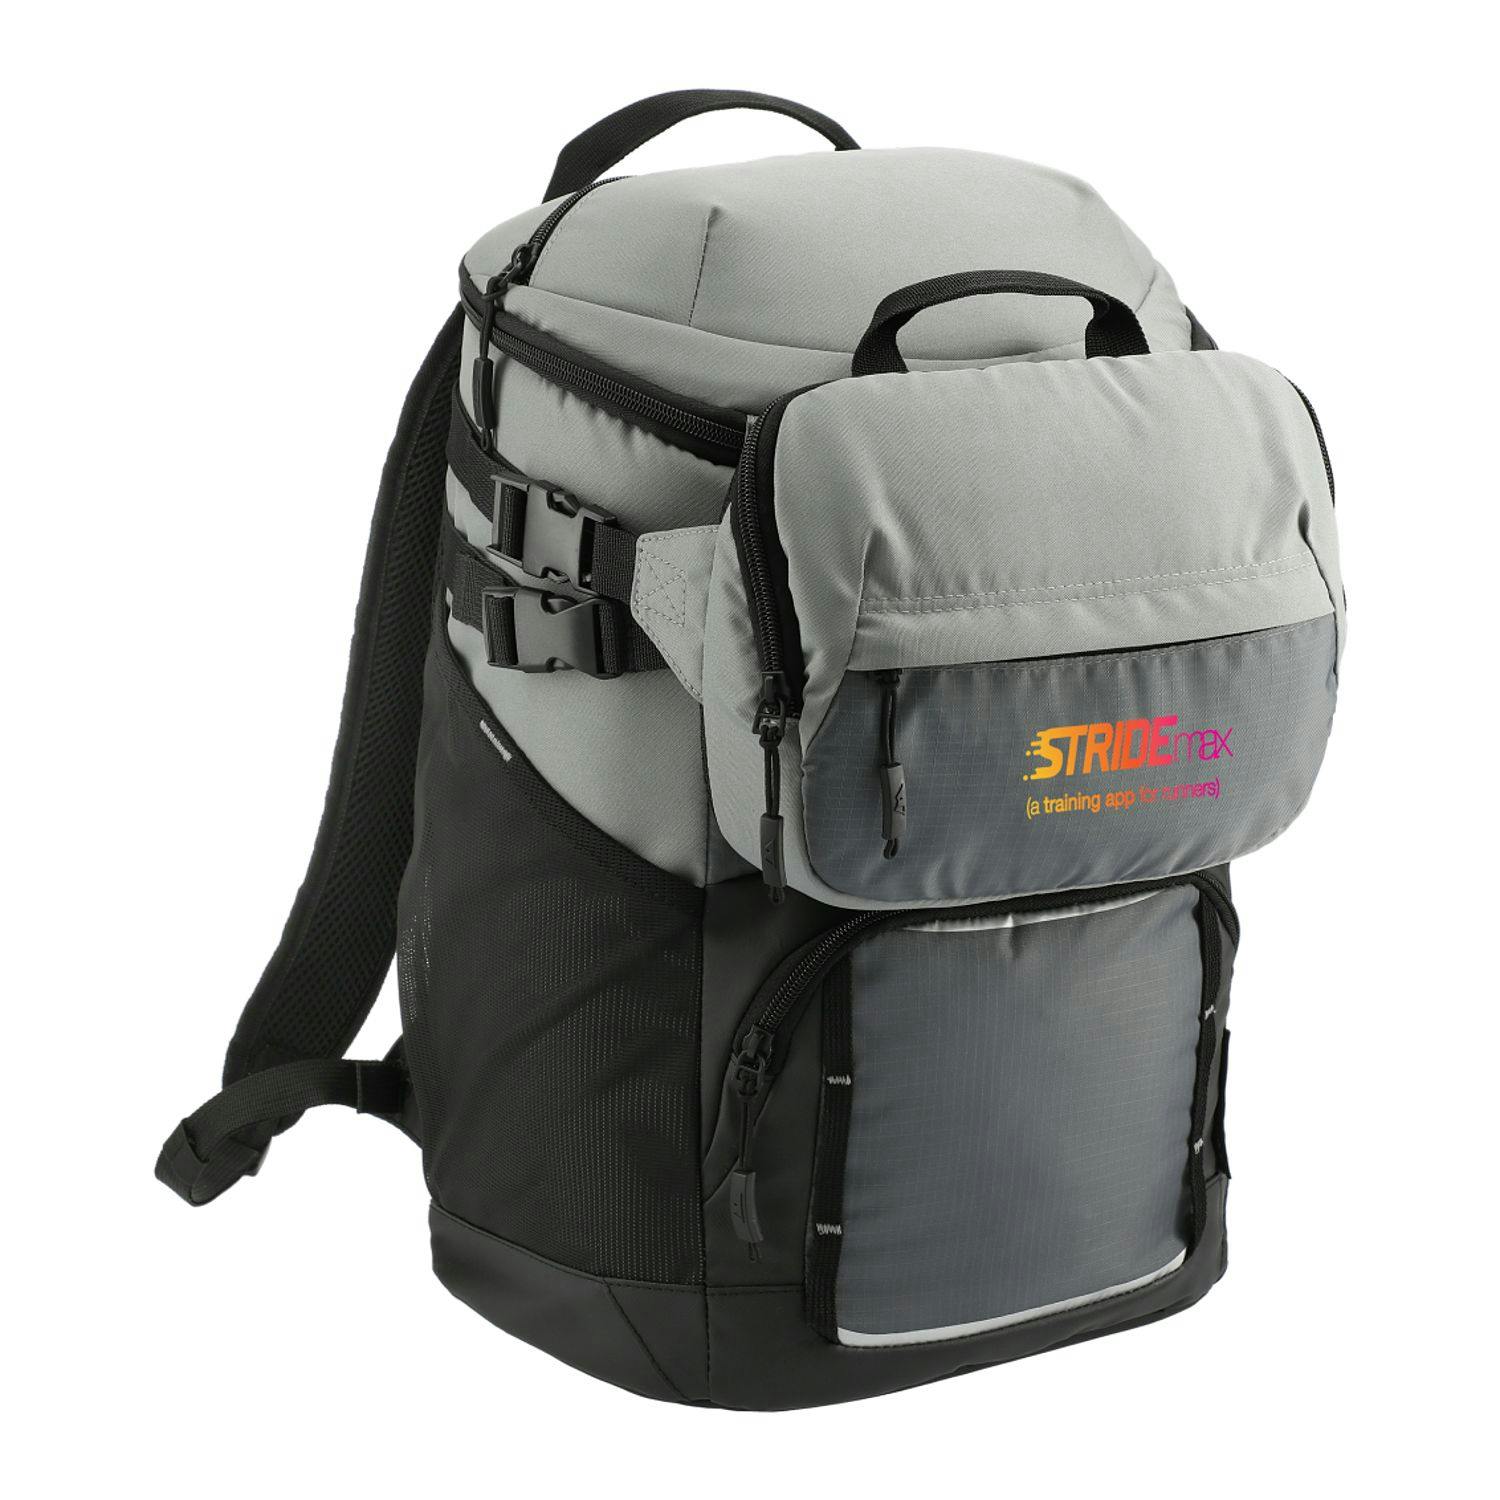 Arctic Zone® Repreve® Backpack Cooler with Sling - additional Image 1